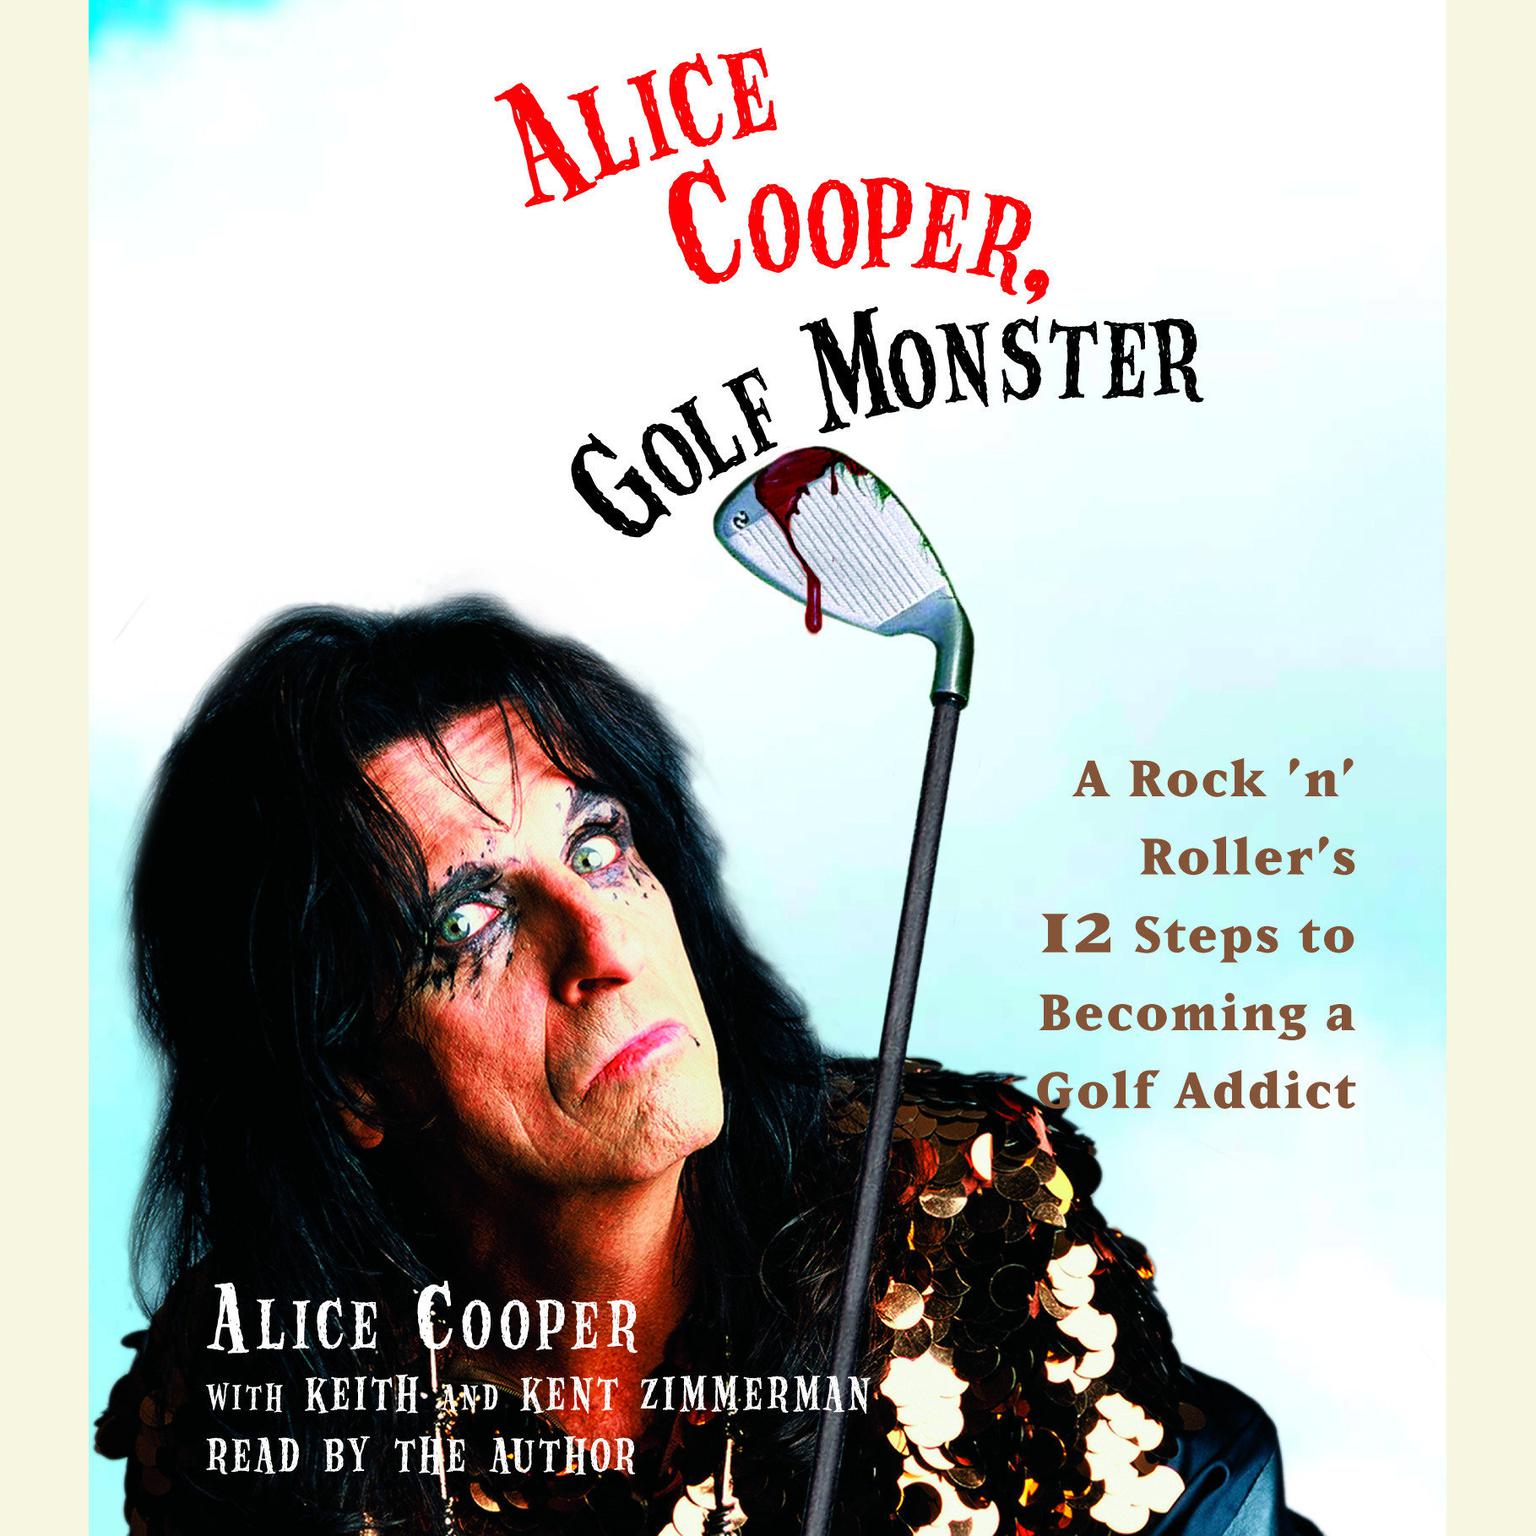 Alice Cooper, Golf Monster (Abridged): A Rock n Rollers Life and 12 Steps to Becoming a Golf Addict Audiobook, by Alice Cooper